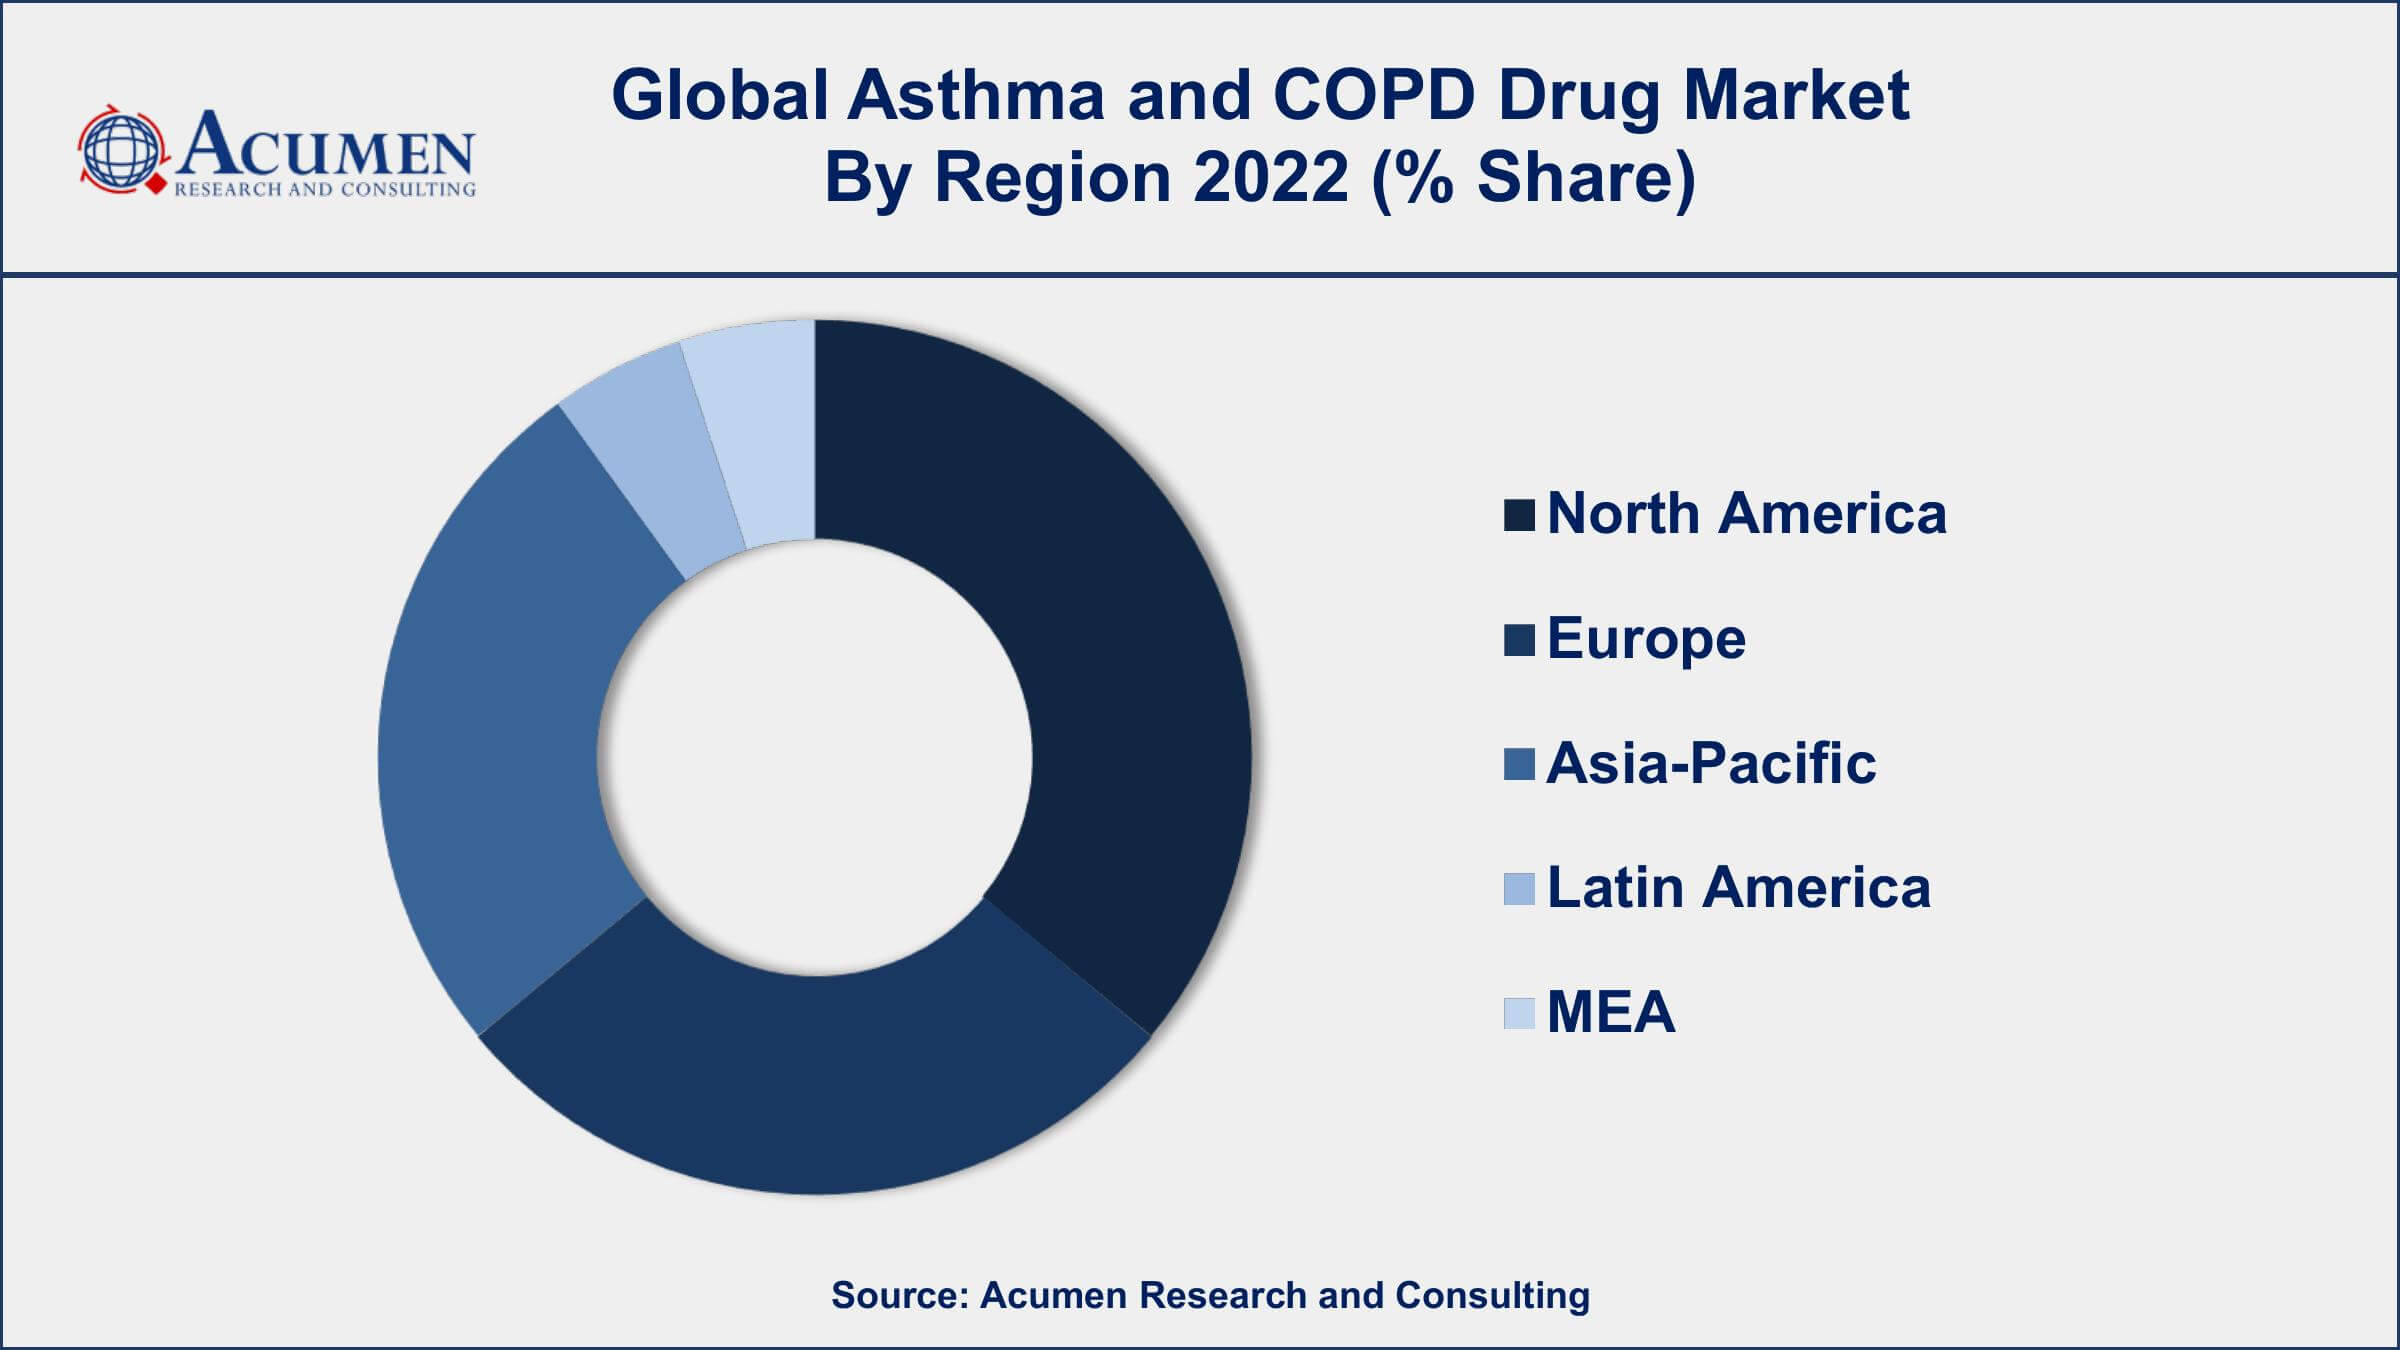 Asthma and COPD Drug Market Opportunities